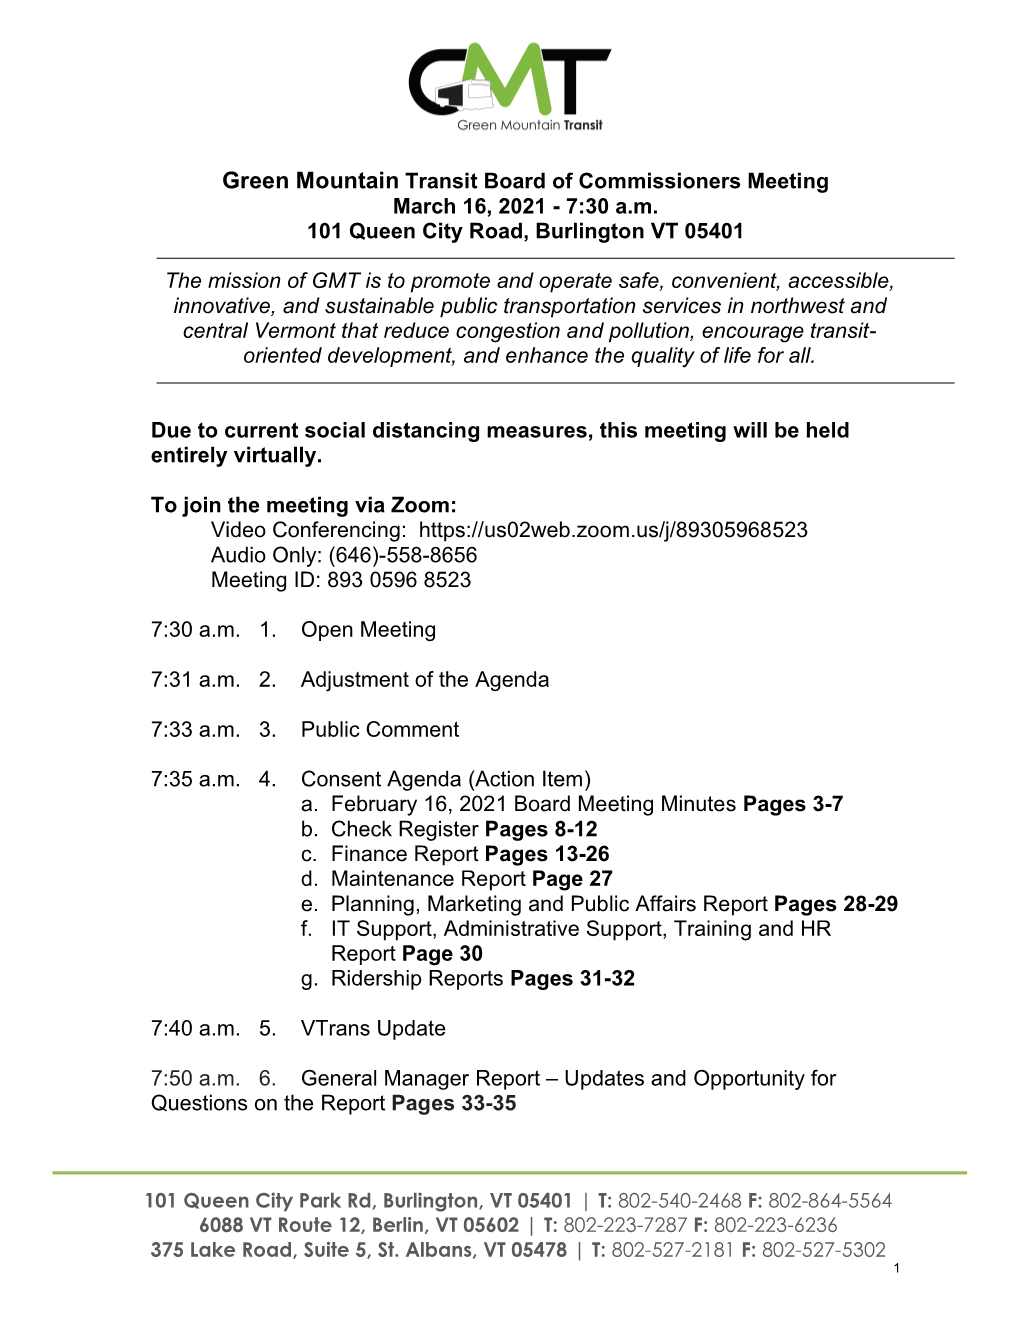 Green Mountain Transit Board of Commissioners Meeting March 16, 2021 - 7:30 A.M